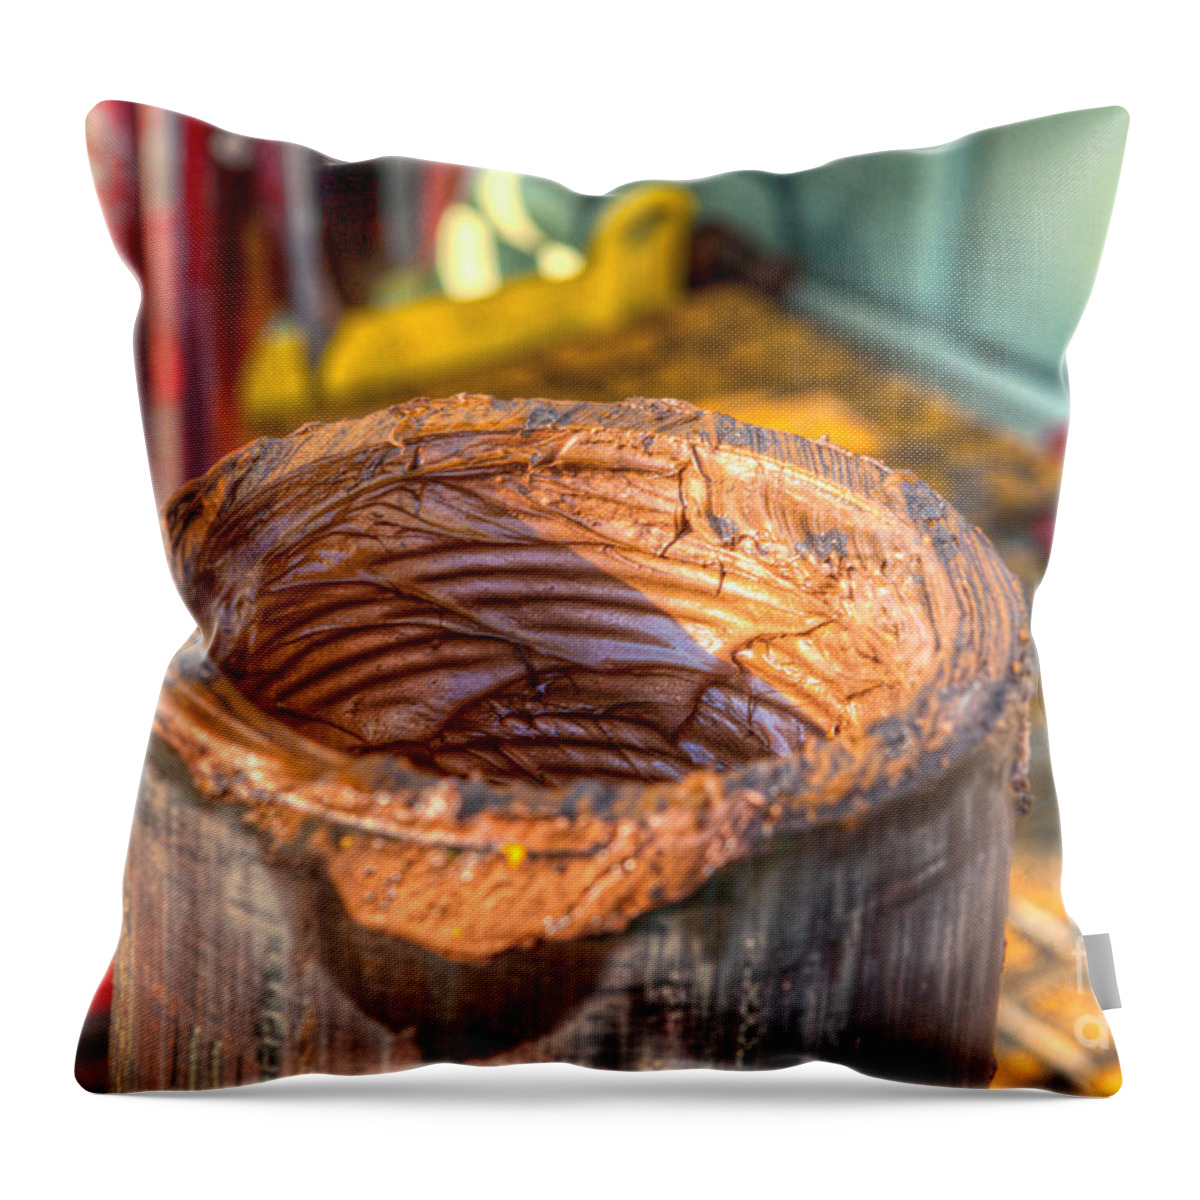 Oil Rig Throw Pillow featuring the photograph Cac003-50 by Cooper Ross